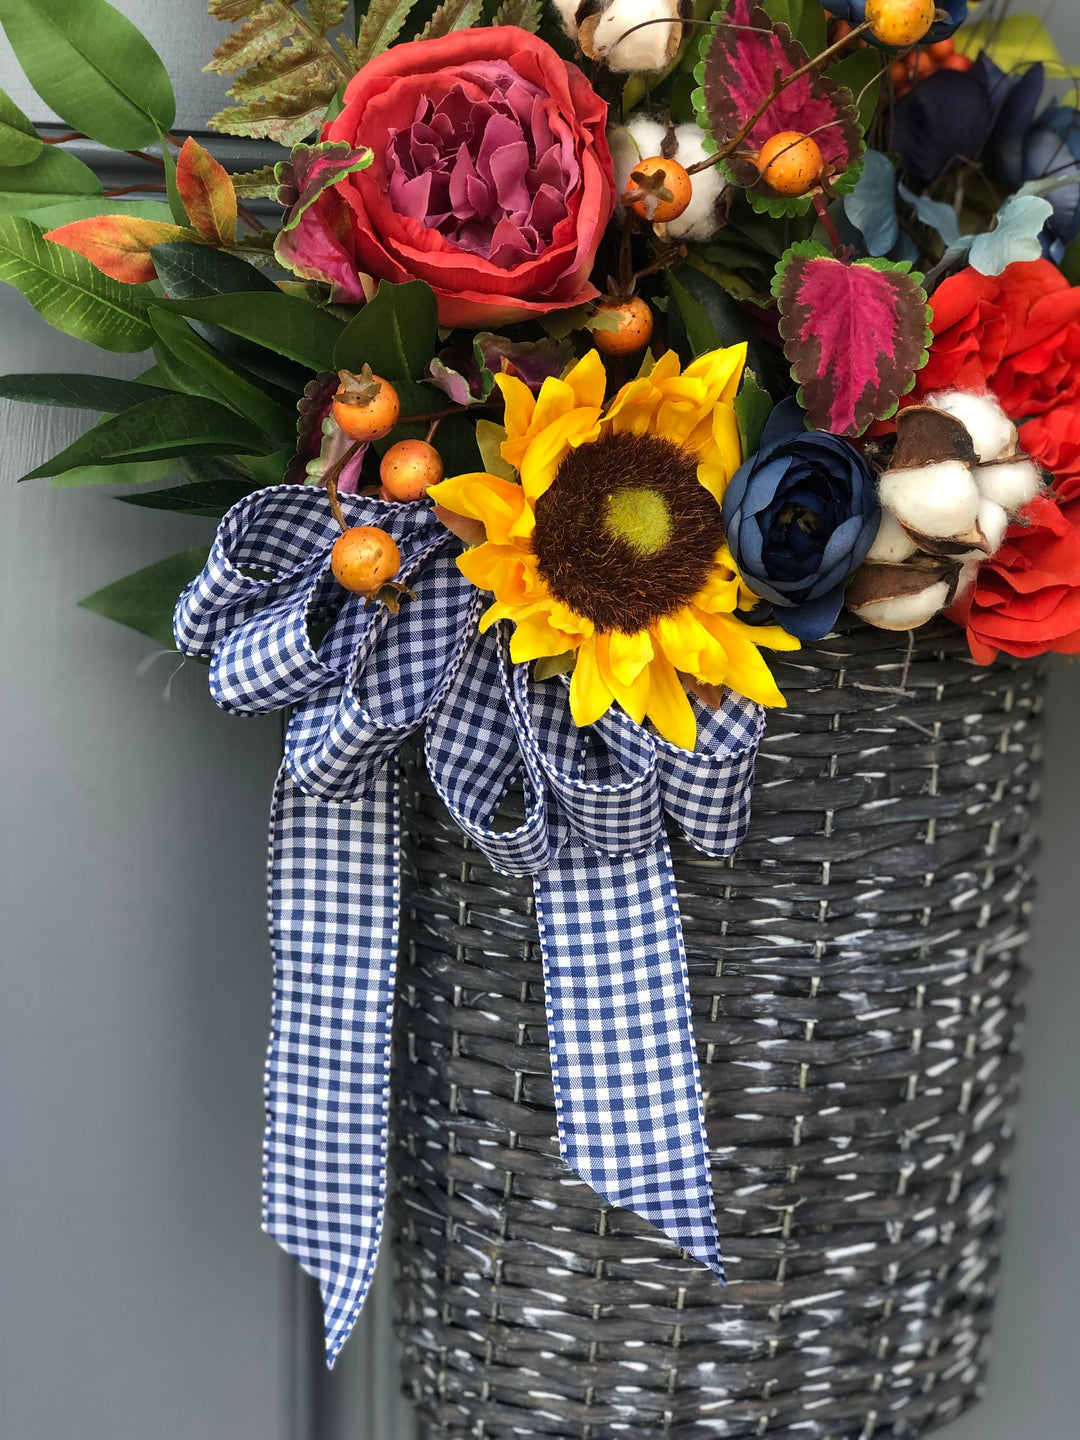 Front door spring wreath Basket, 20x16x7 Wicker Basket porch, With A Mix Of Evergreen, Sunflowers, Cotton, Ranunculus, Berries, Bow